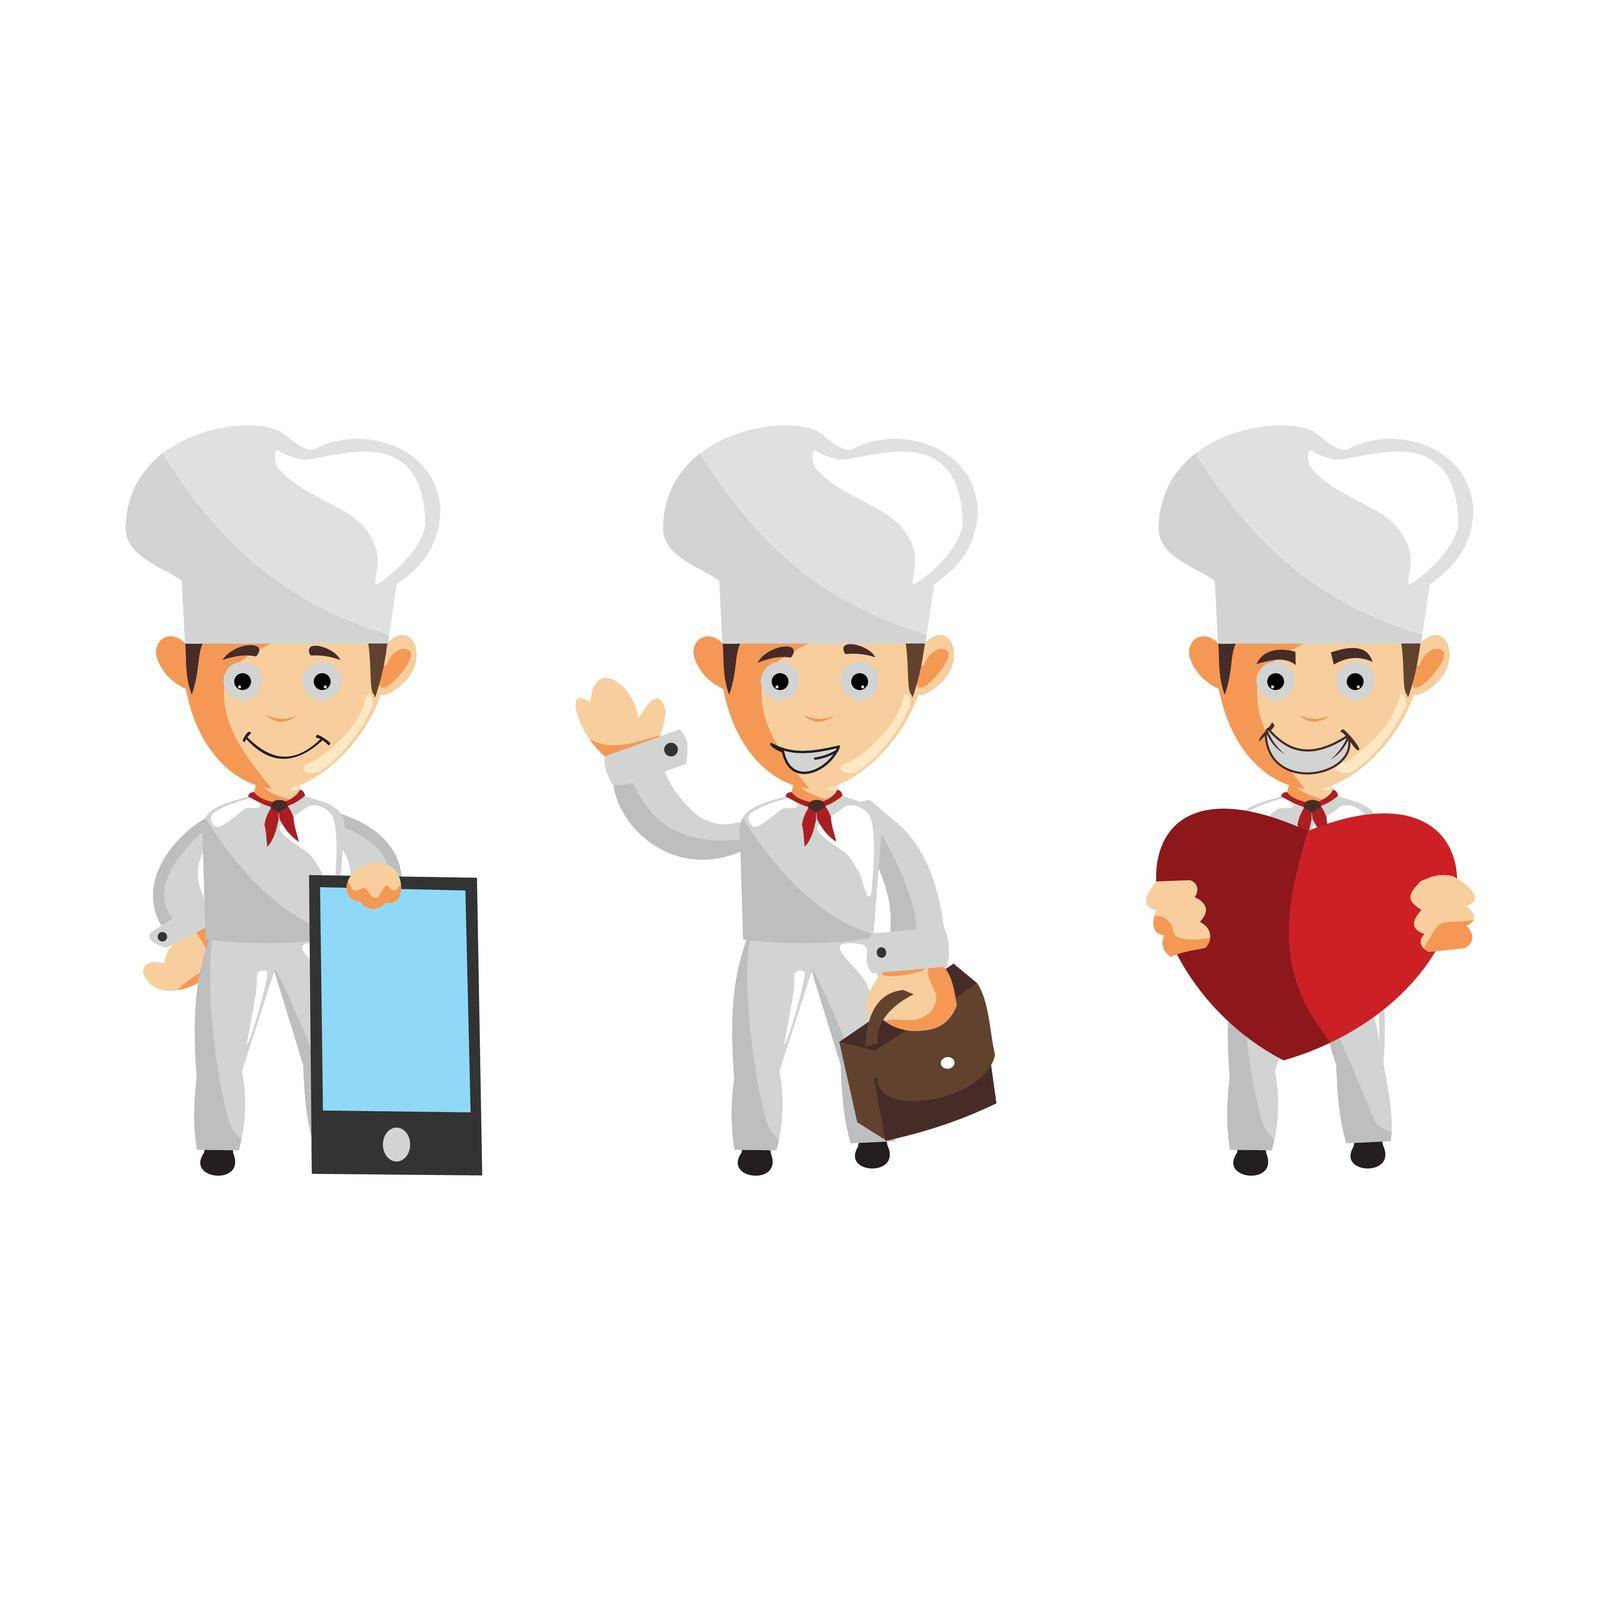 Chef character creation Illustration Template Set by alluranet